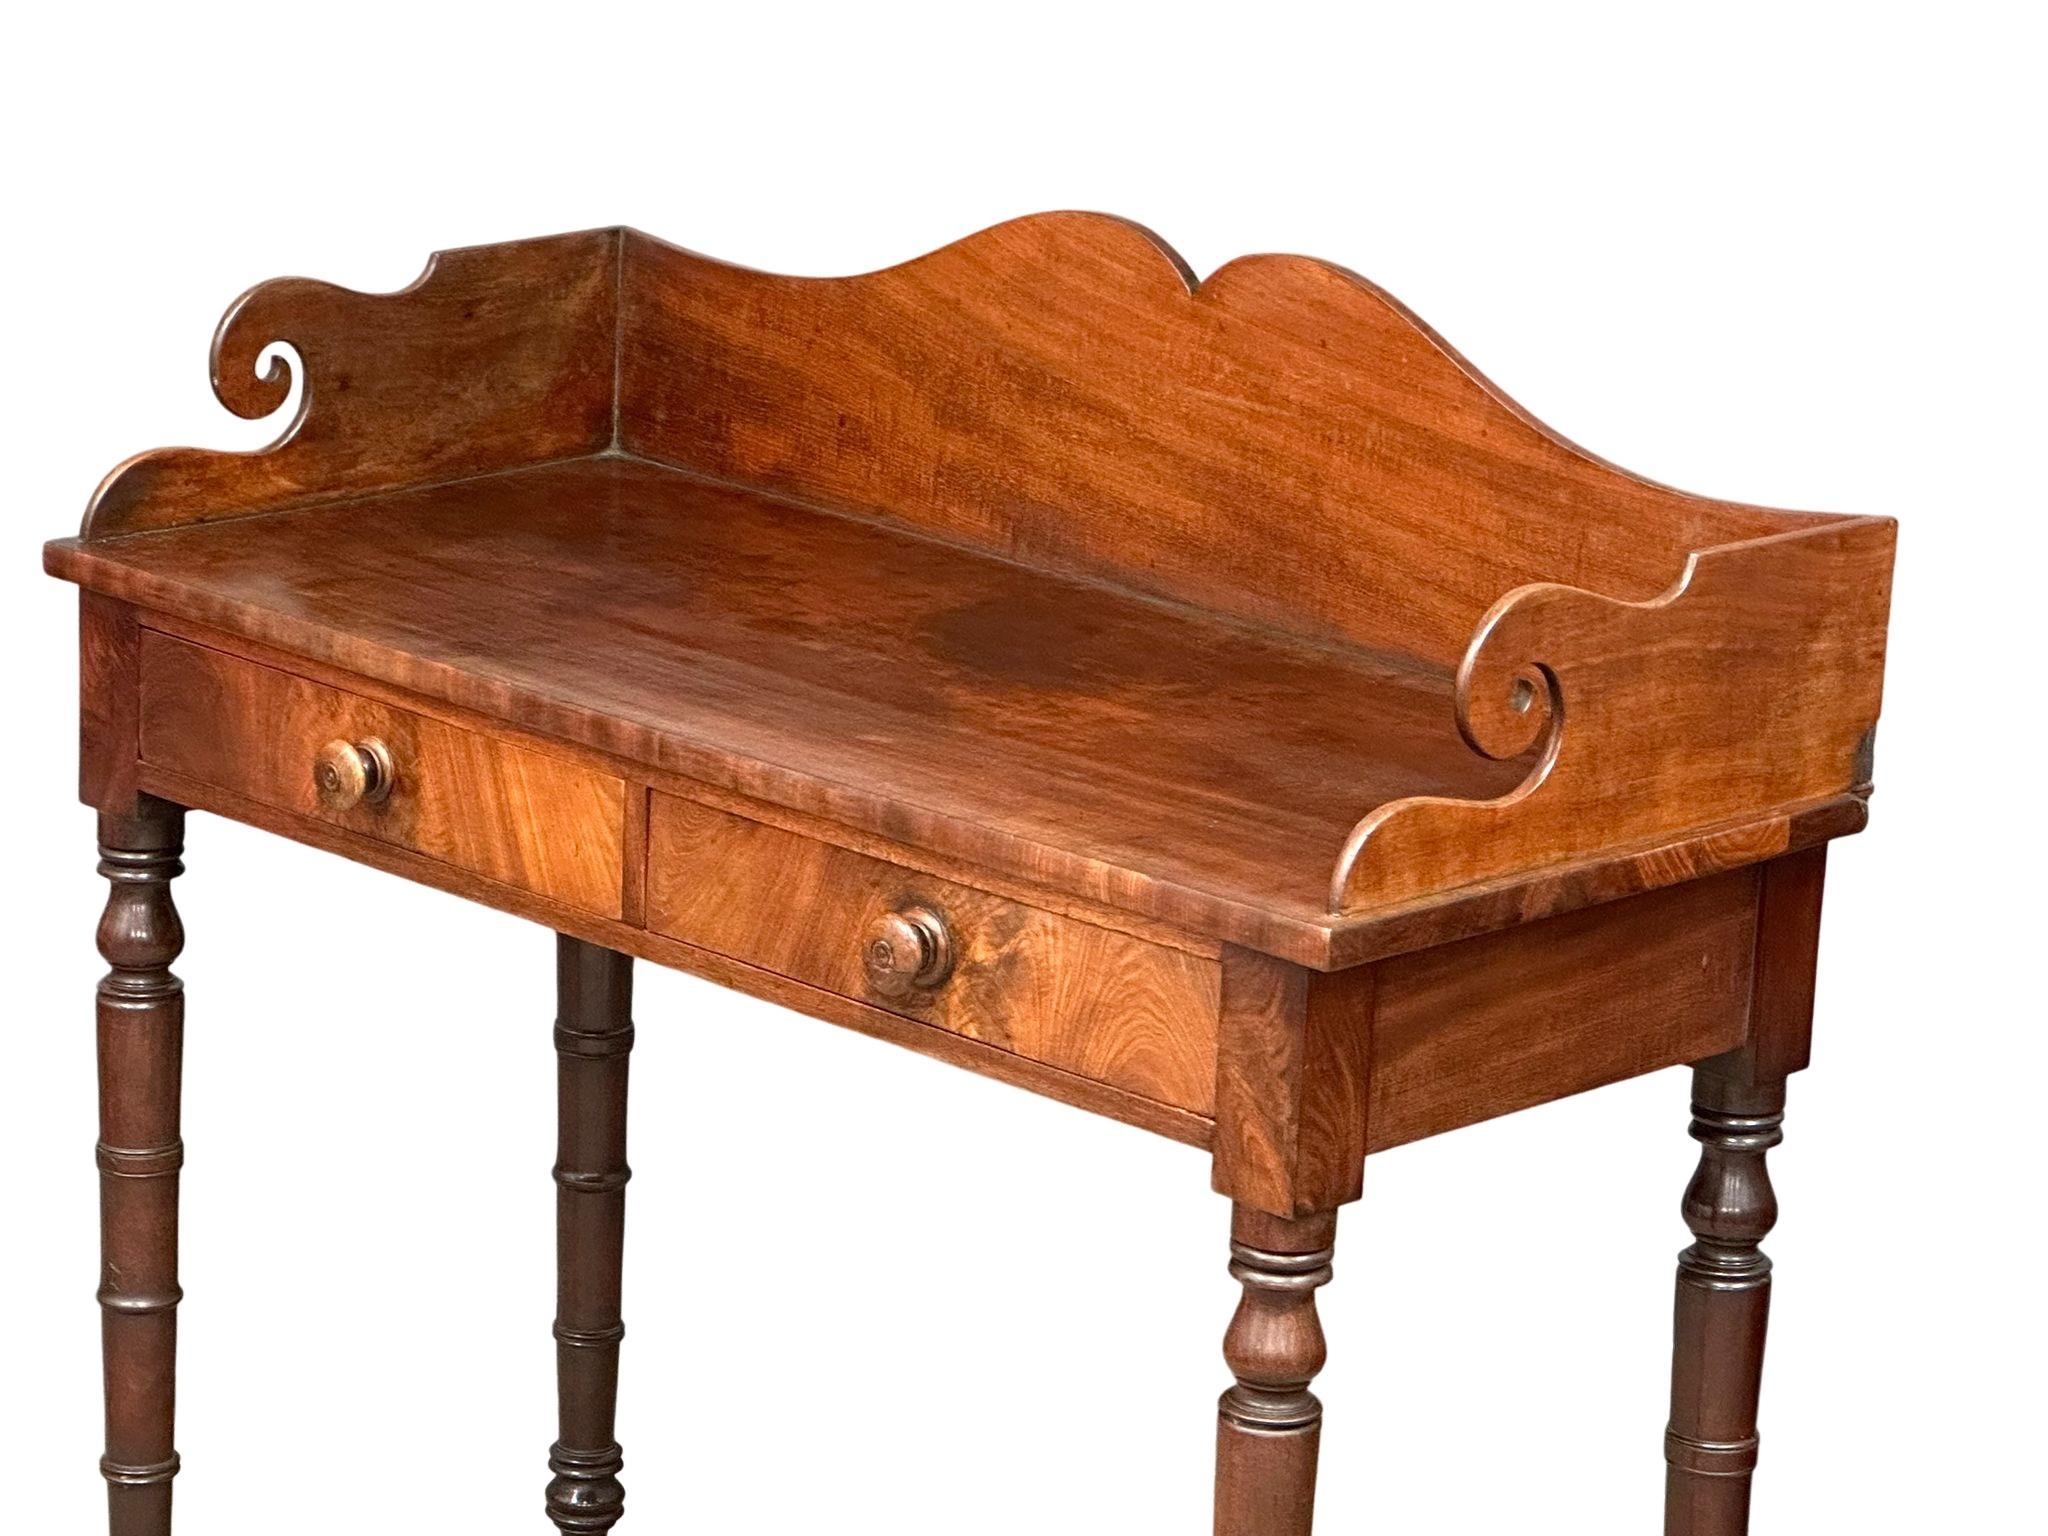 A late George IV mahogany gallery back side table on reeded legs, containing 2 front facing drawers. - Image 7 of 10